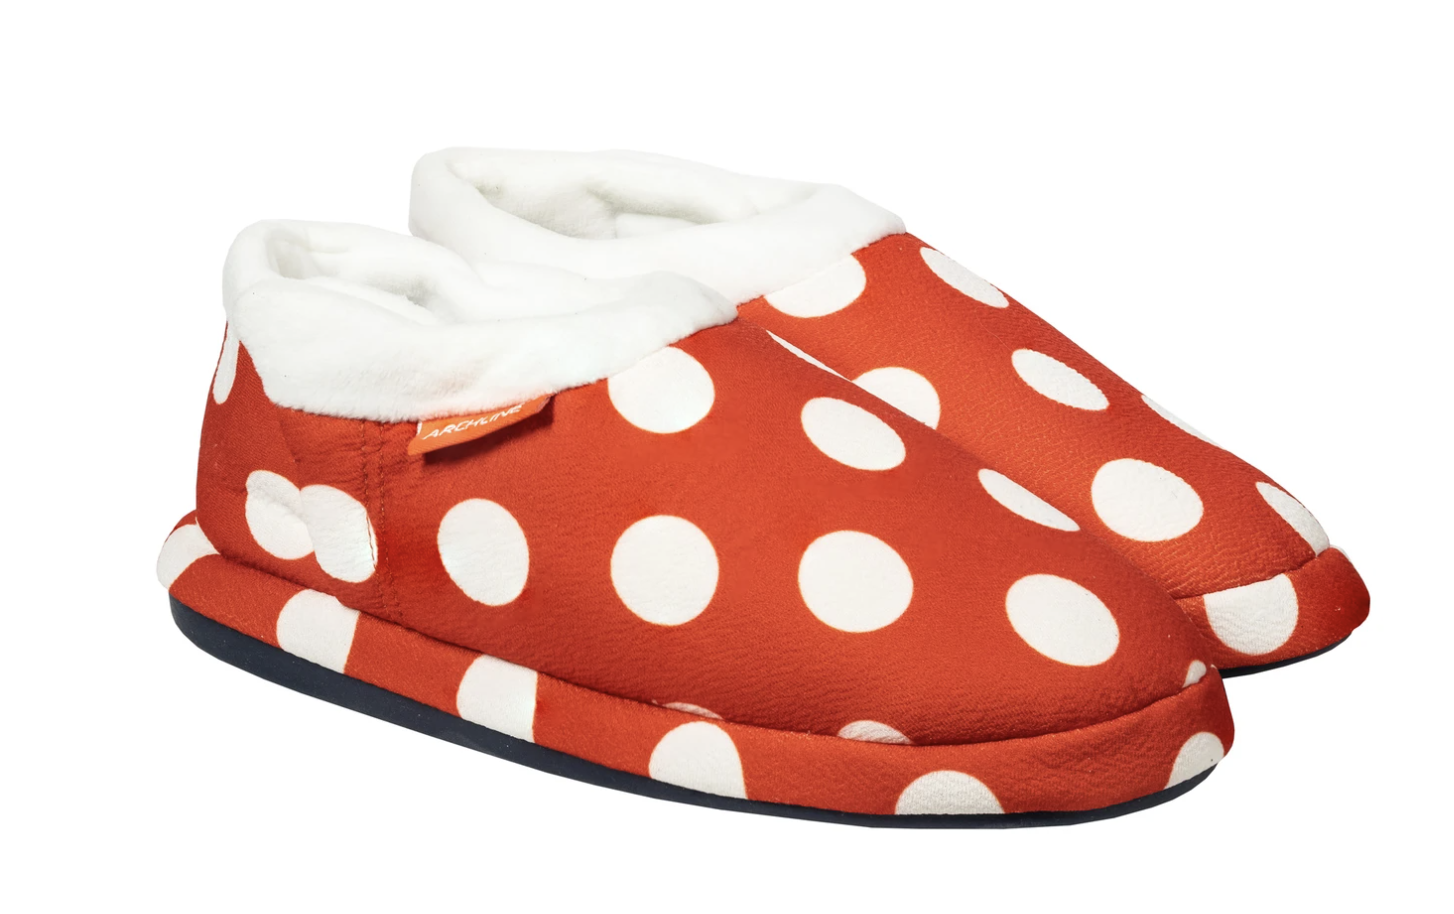 Orthotic Slippers CLOSED Back Scuffs Moccasins Pain Relief - Red Polka Dots - EUR 40 (Womens 9 US)